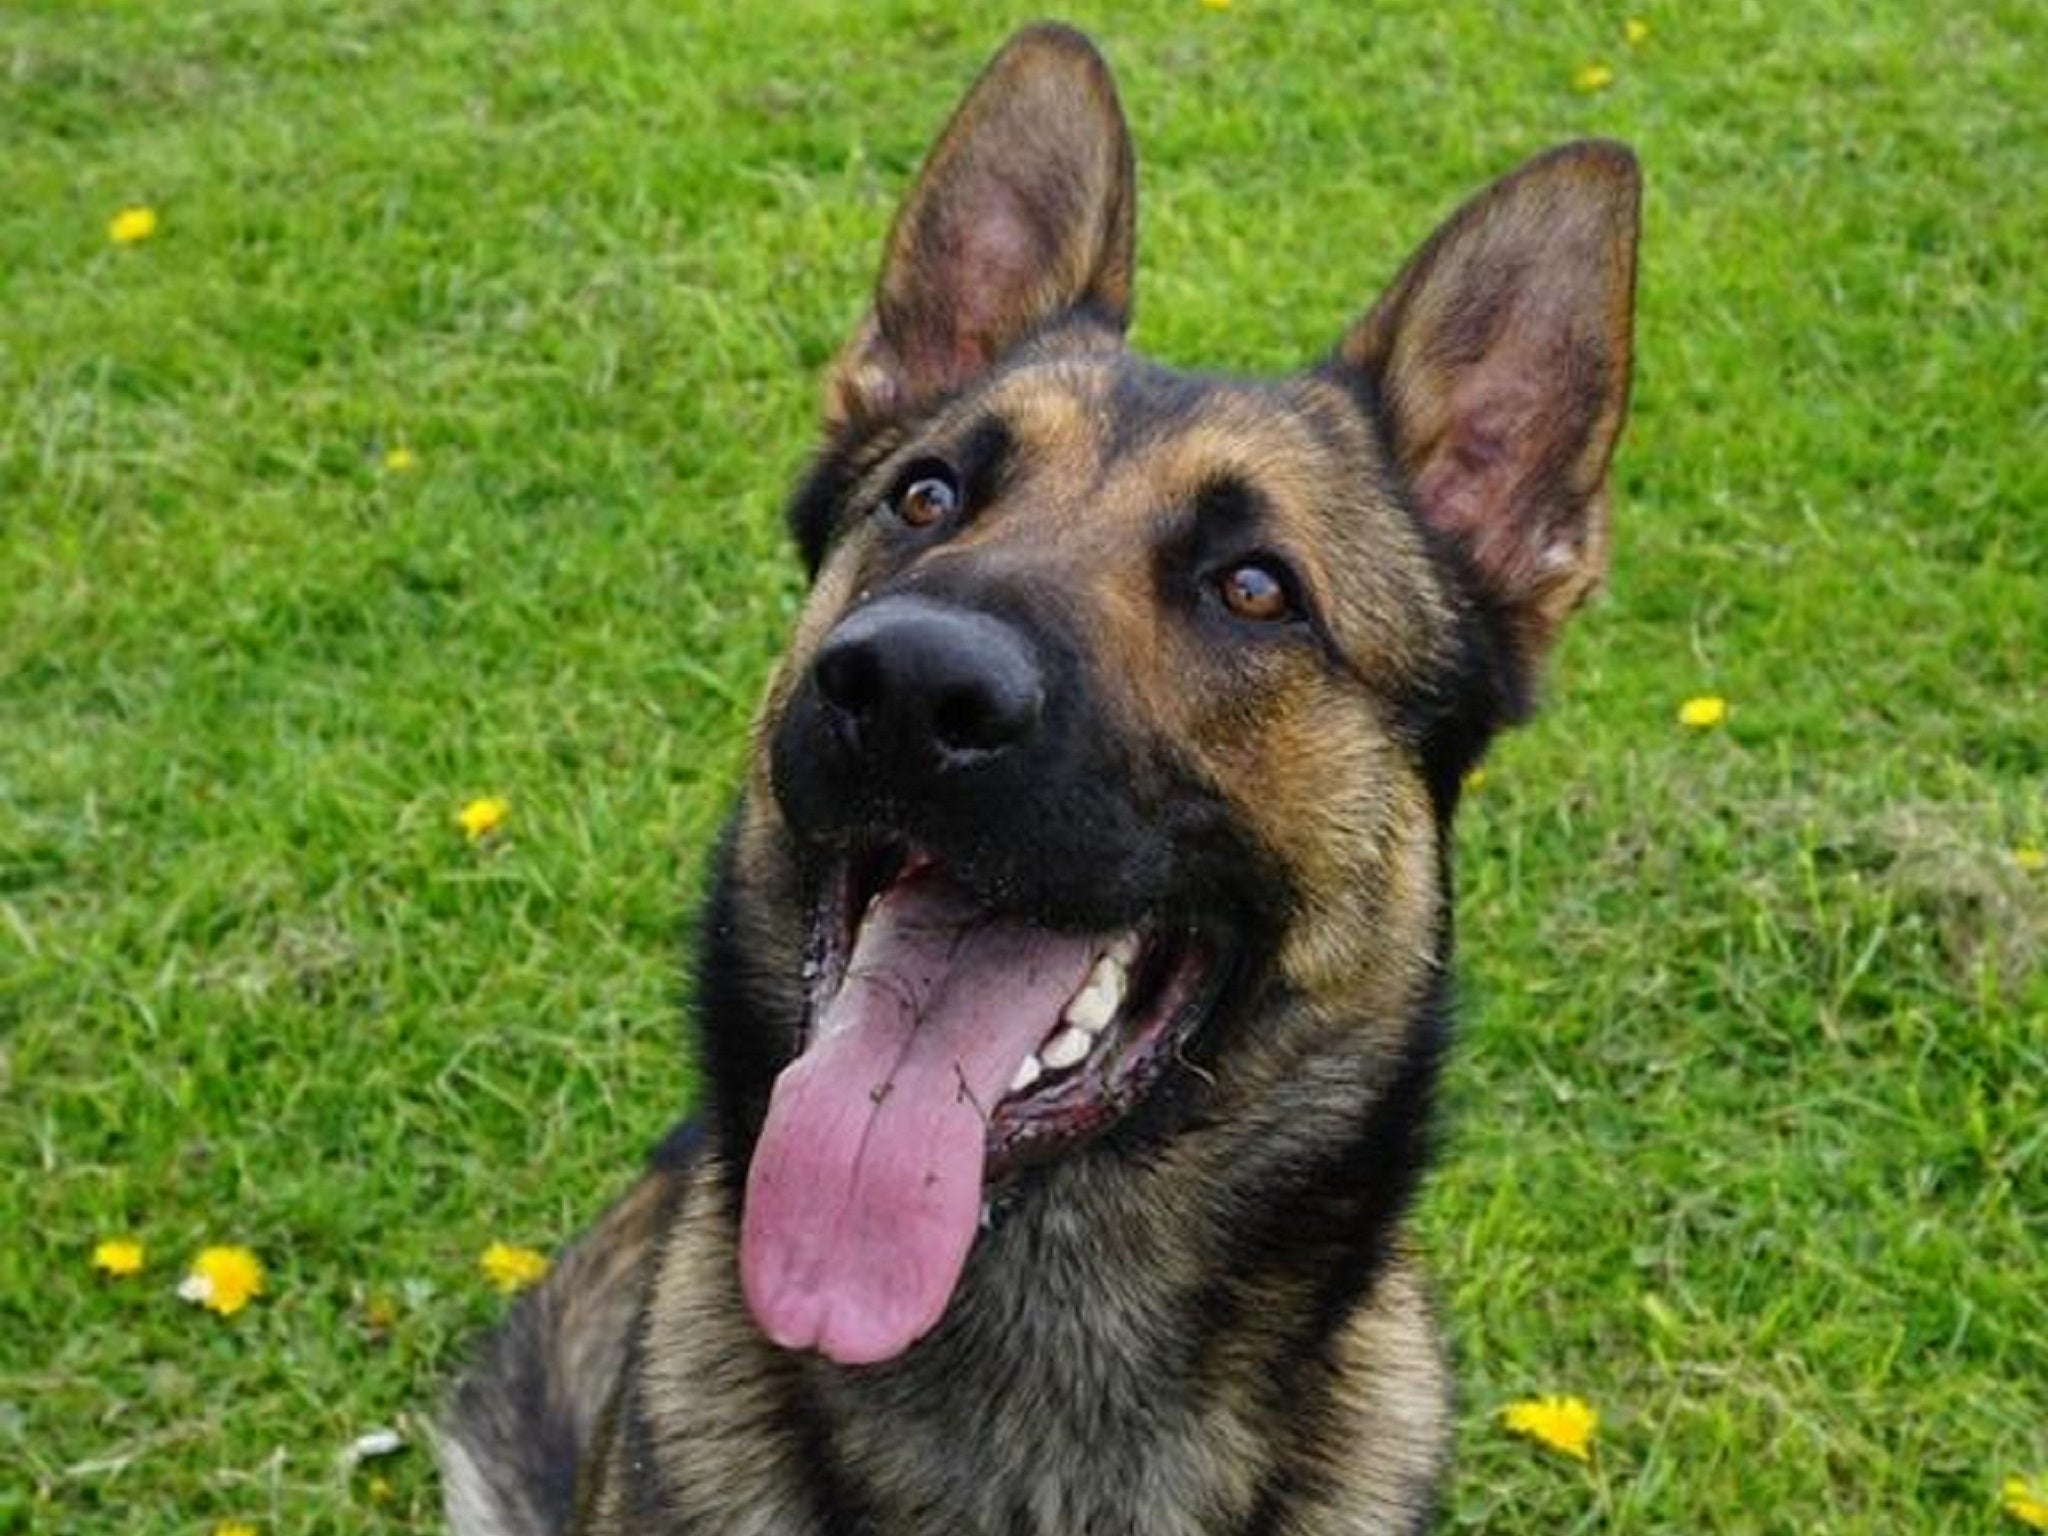 Police dog Quantum, which was also attacked by a criminal two years ago